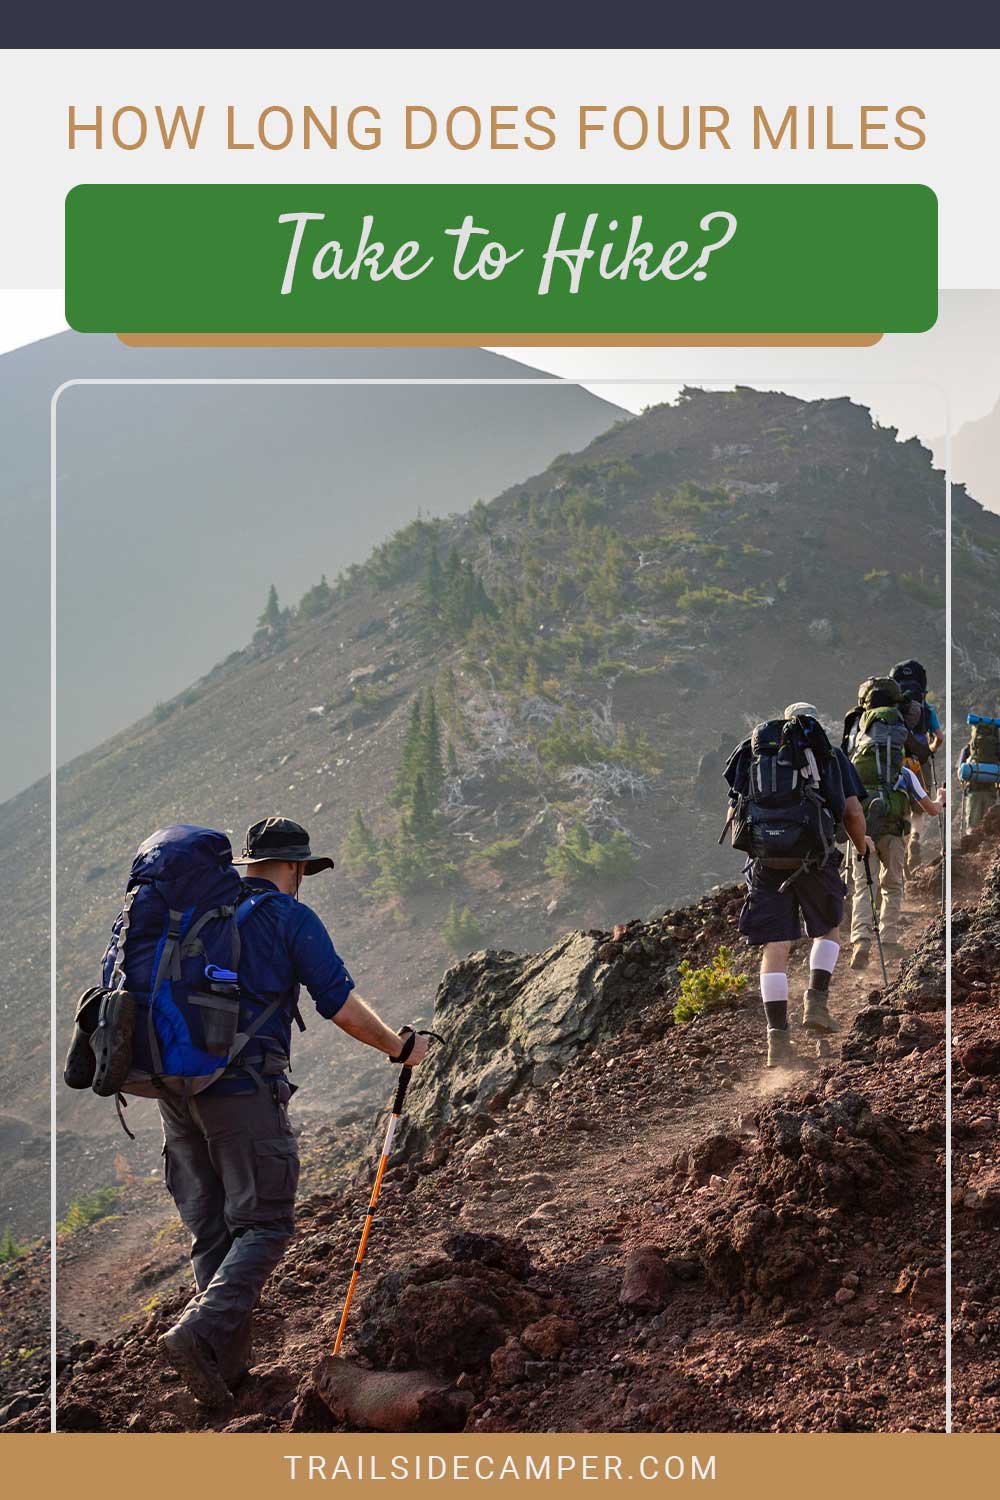 How Long Does Four Miles Take to Hike?